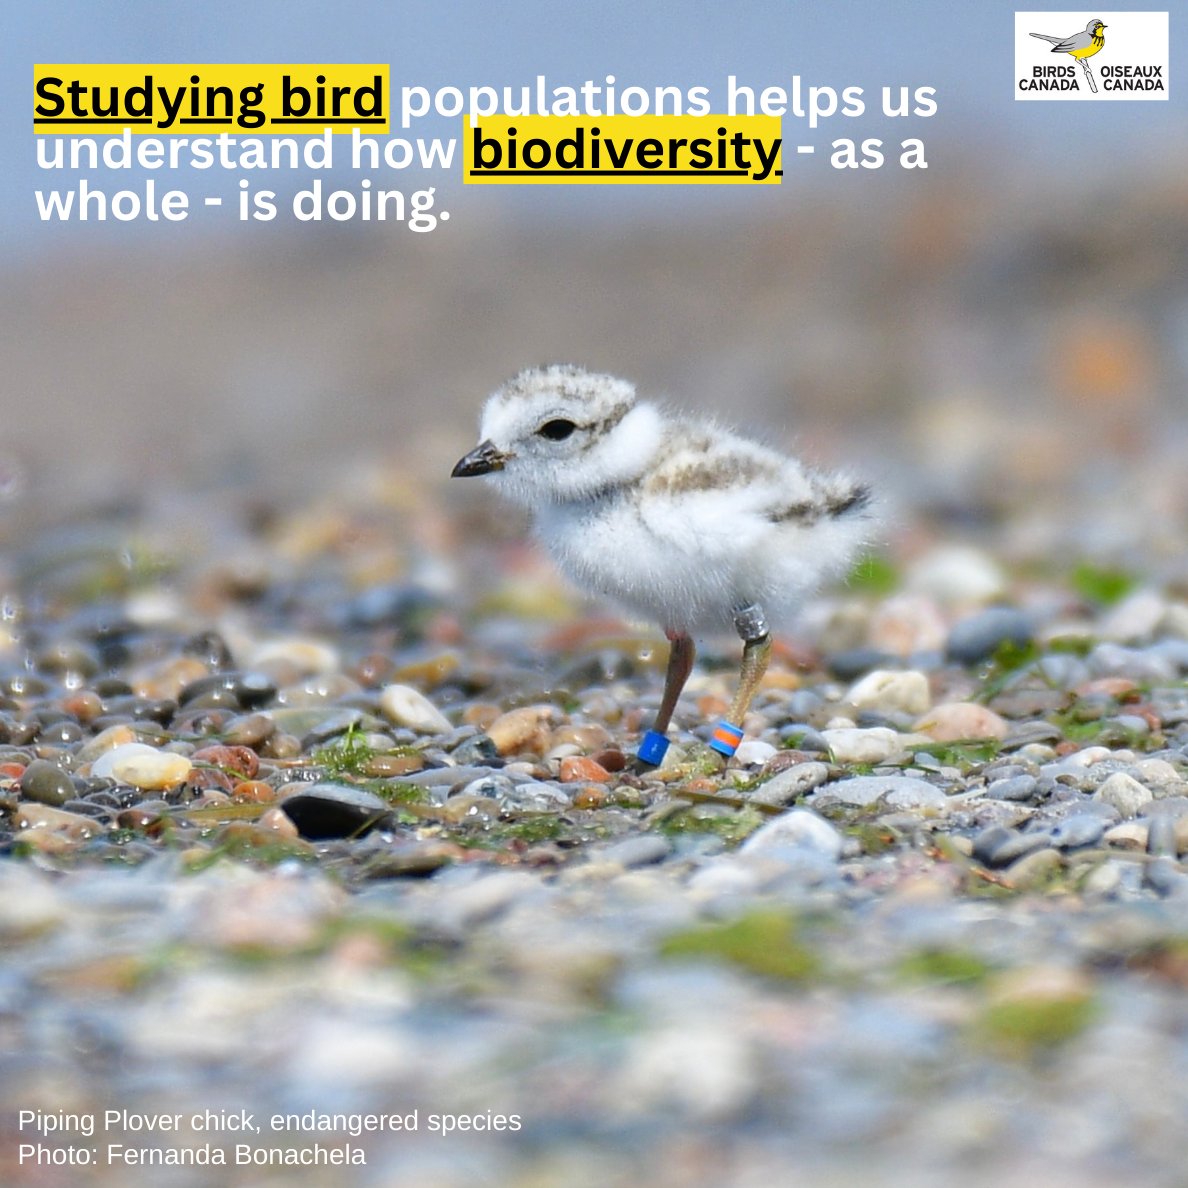 Through our programs, Citizen Scientists who collect #bird observations provide information on the status of bird populations and #biodiversity. #COP15 #NatureCOP